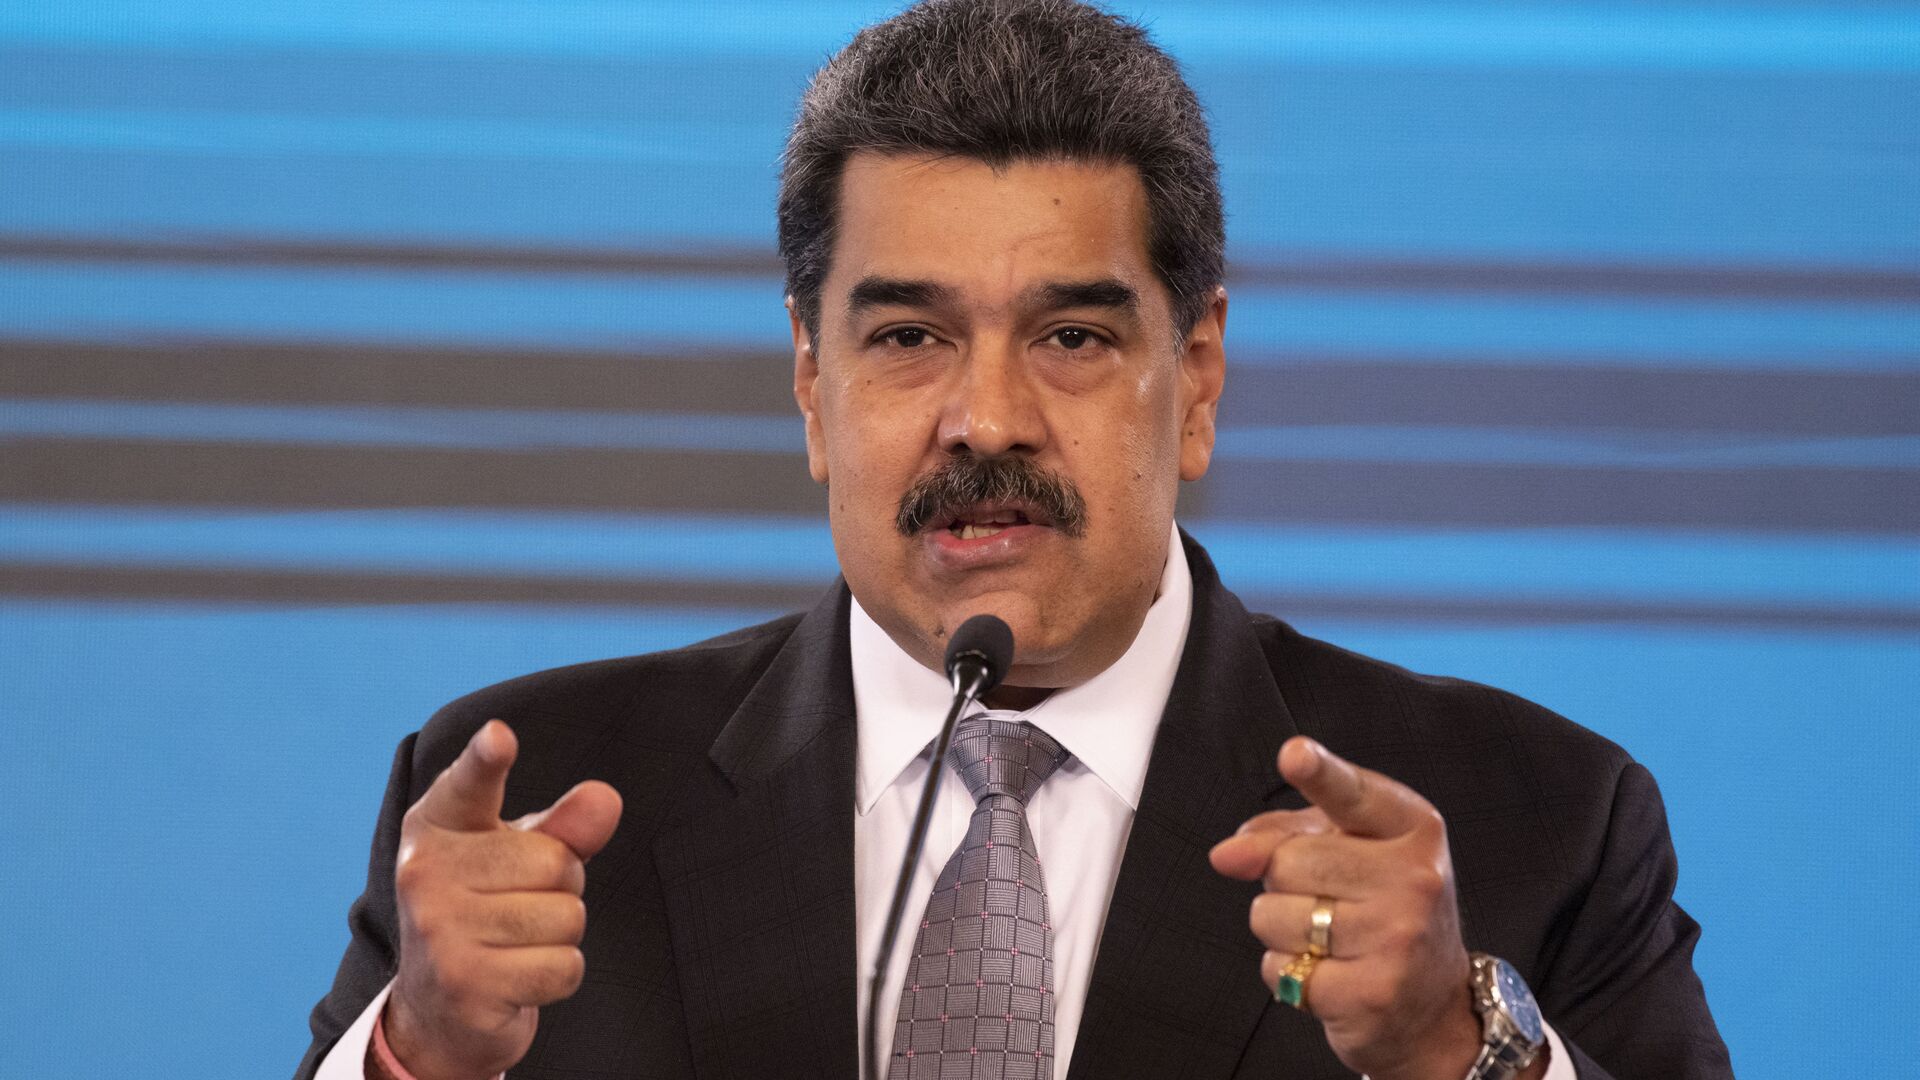 Venezuelan President Nicolas Maduro, gestures while speaking during a press conference at the Miraflores presidential palace in Caracas on February 17, 2021. - Sputnik International, 1920, 08.03.2022